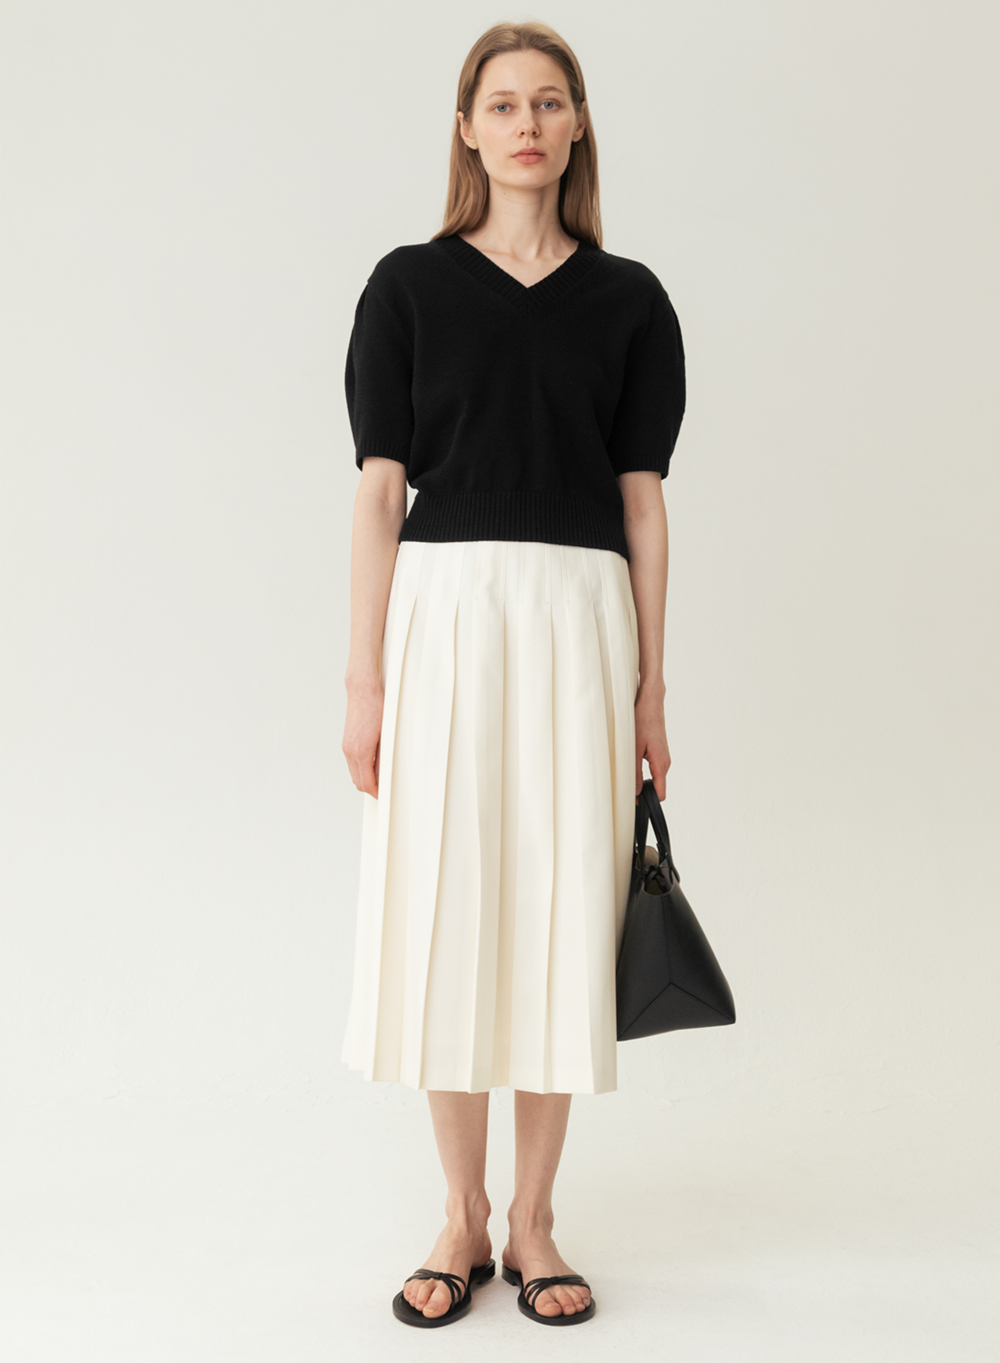 RESORT23 Puff Sleeve Knitted Top Black